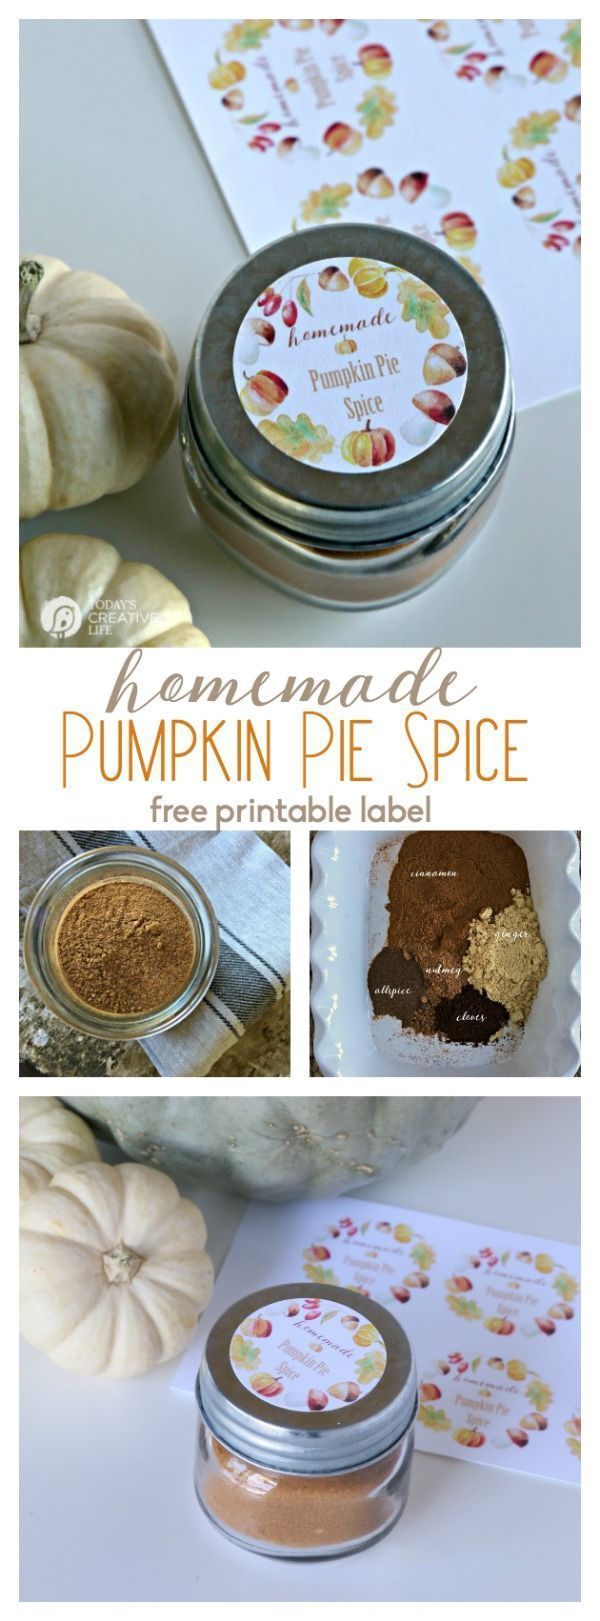 Pumpkin Pie Spice | make your own homemade pumpkin pie spice with this simple re...